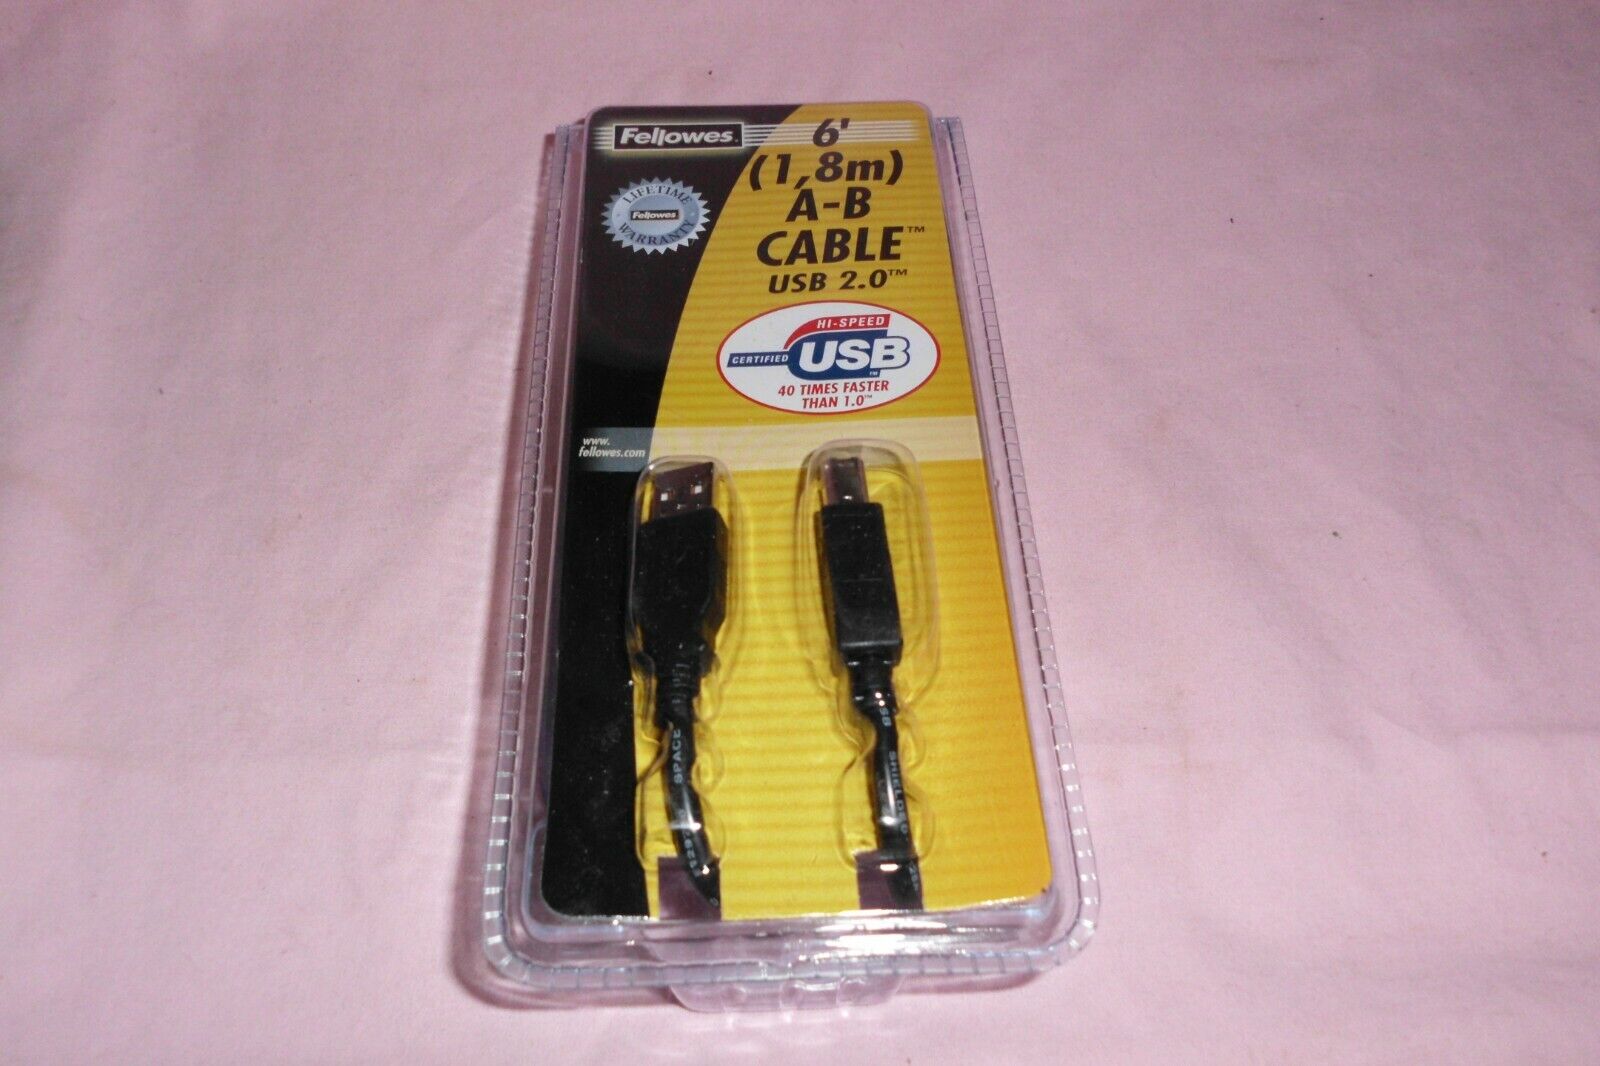 Fellowes 6 Foot (1,8m) A-B Cable USB 2.0, #99465  - NEW 